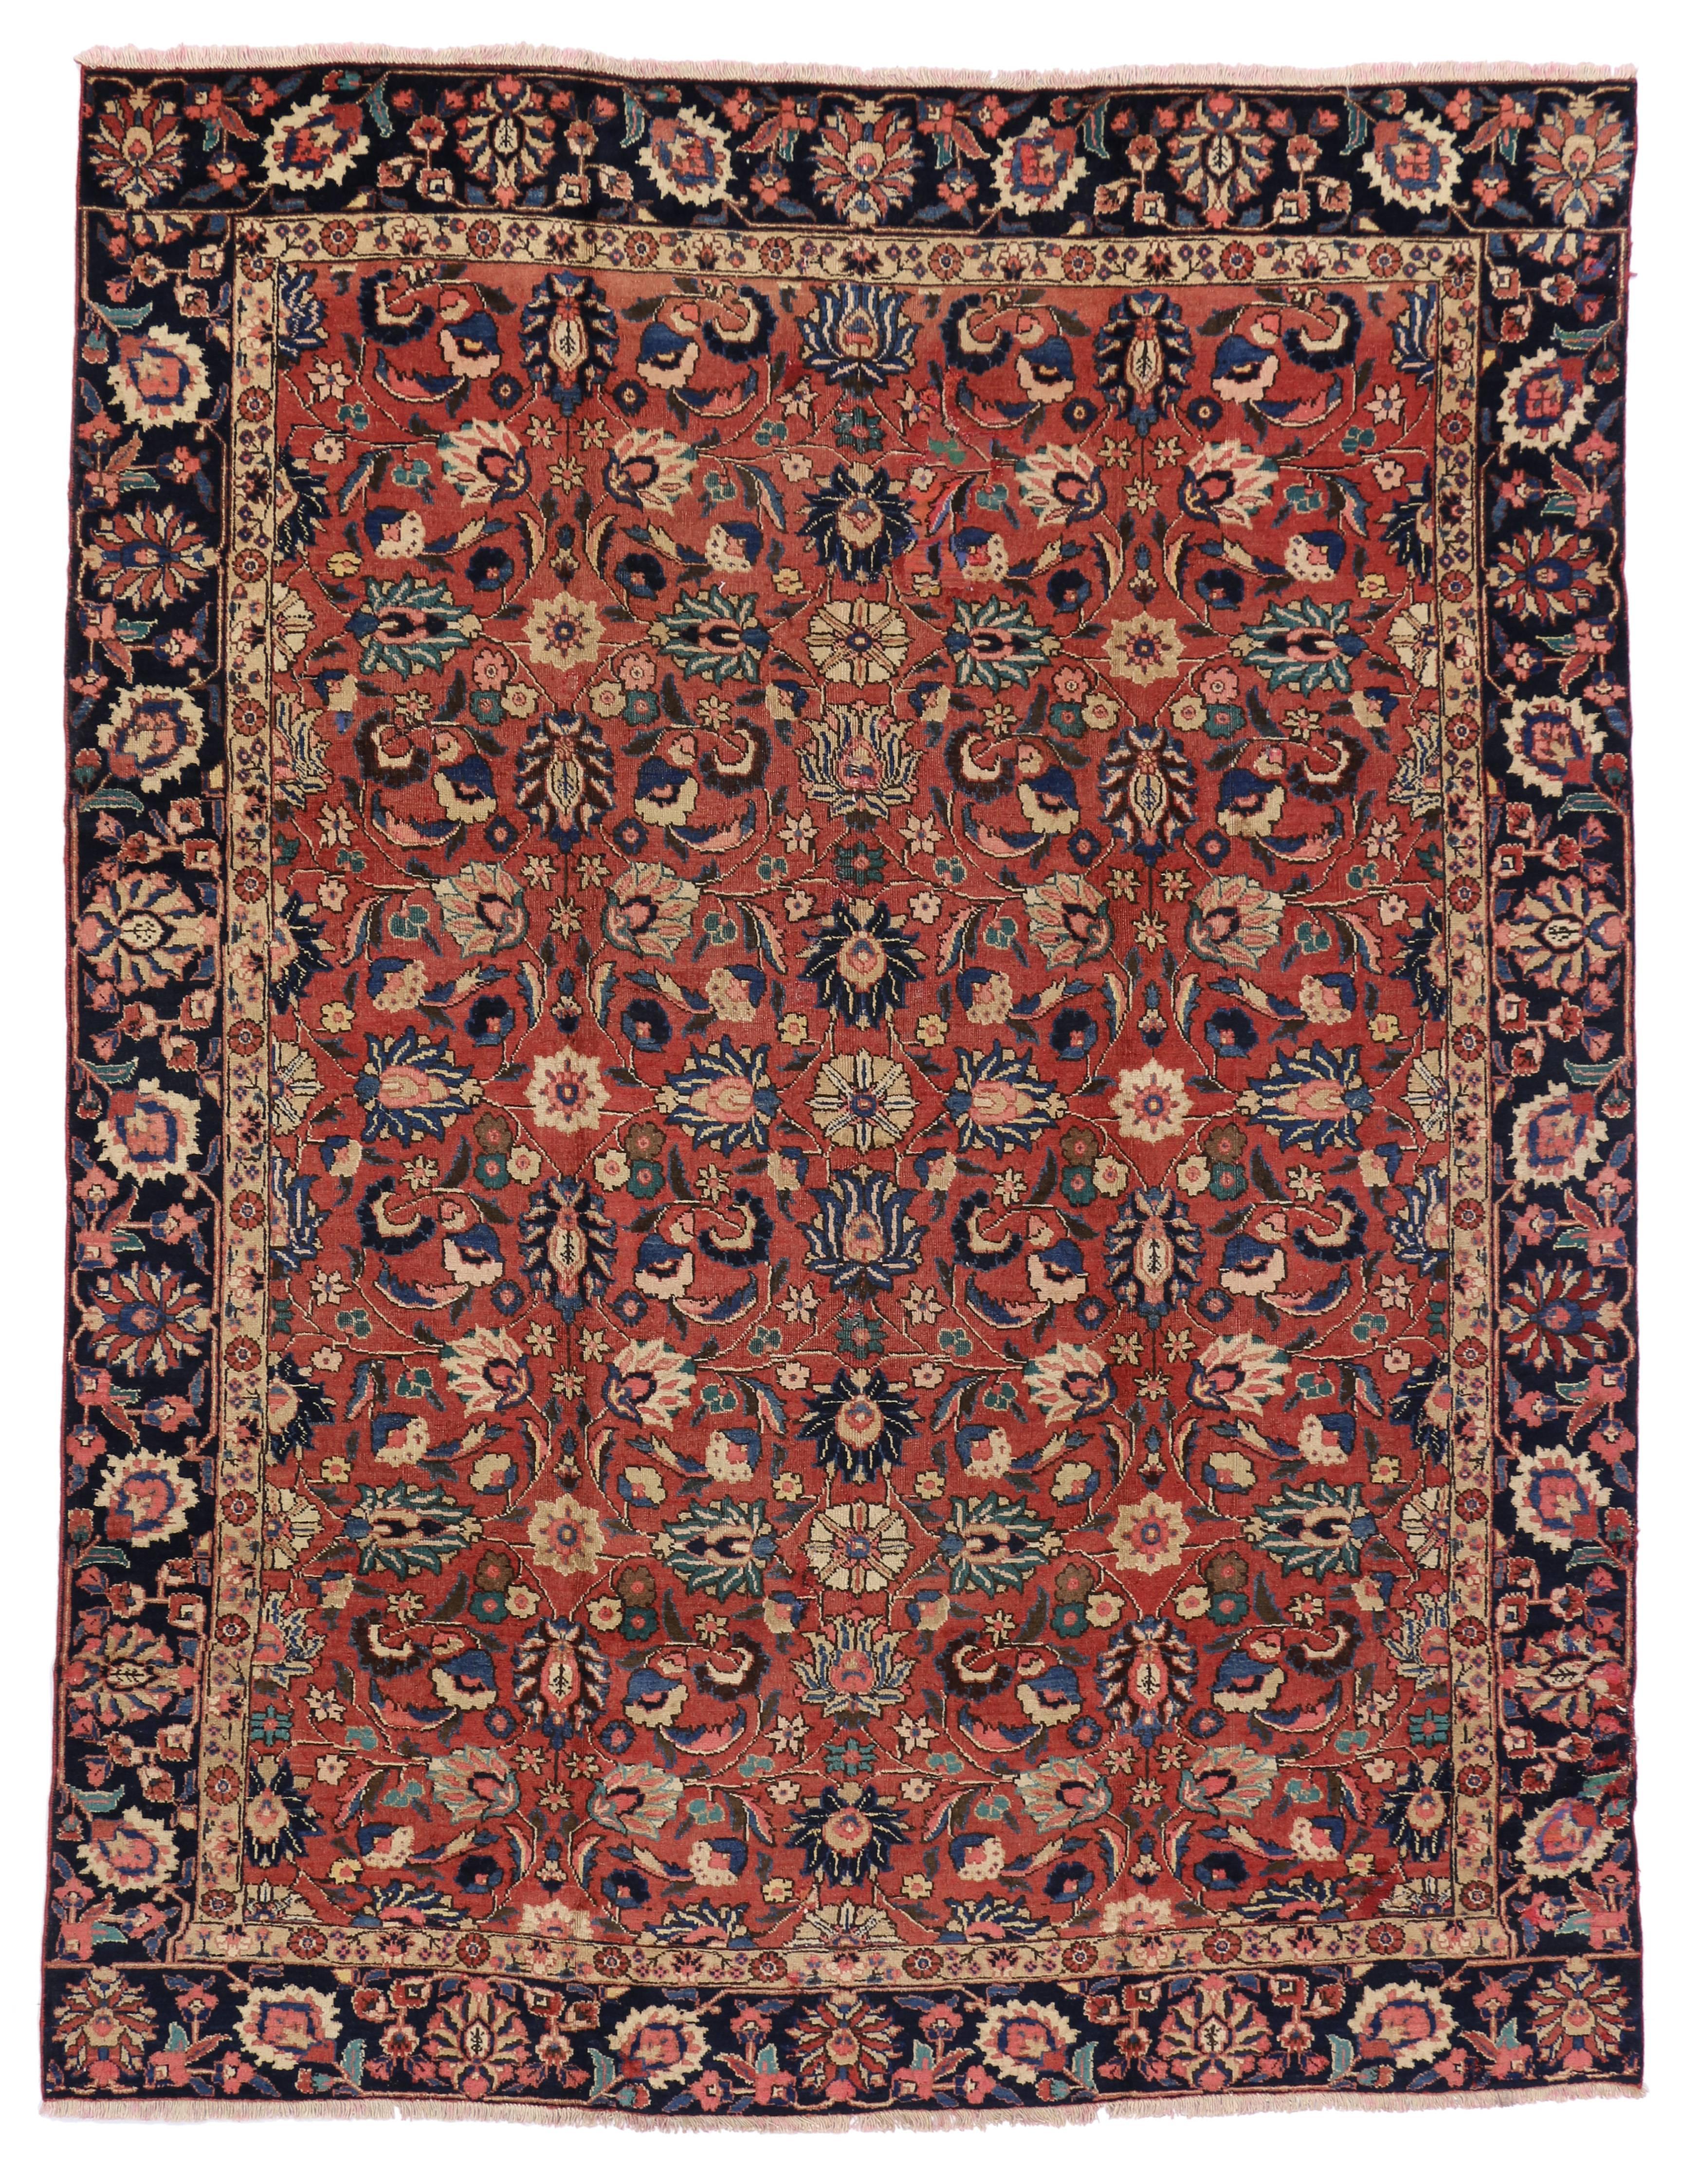 75875 vintage Persian Tabriz with traditional style. This hand-knotted wool vintage Persian Tabriz rug features an all-over pattern surrounded by a classic border creating a well-balanced and timeless design. This vintage Persian Tabriz rug brings a